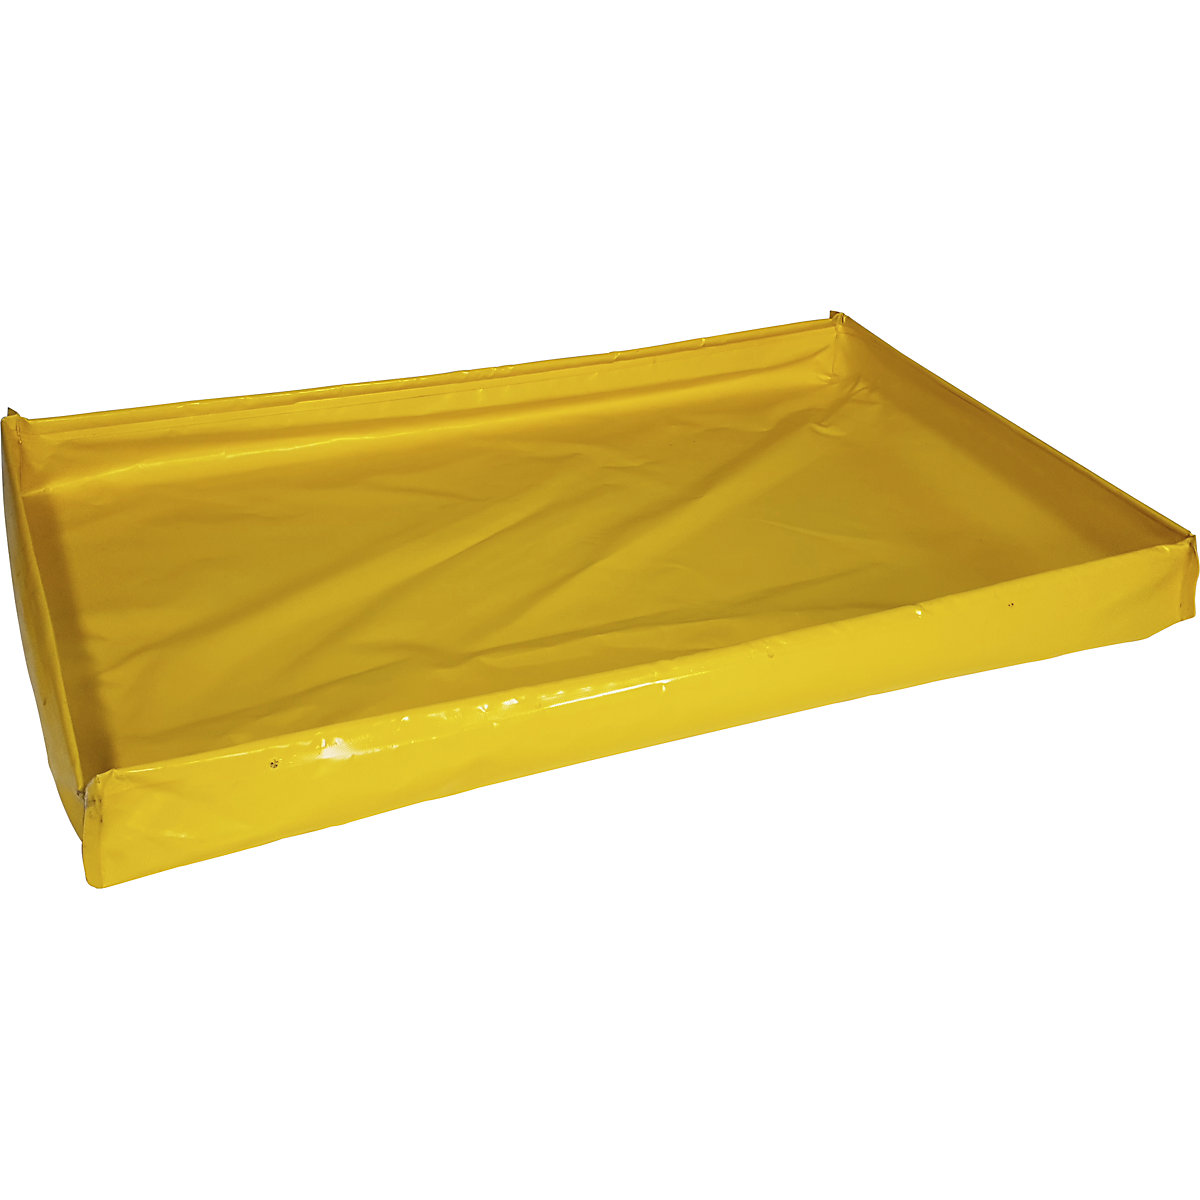 Folding tray small container – eurokraft basic, made of PVC, collection capacity 115 l-8